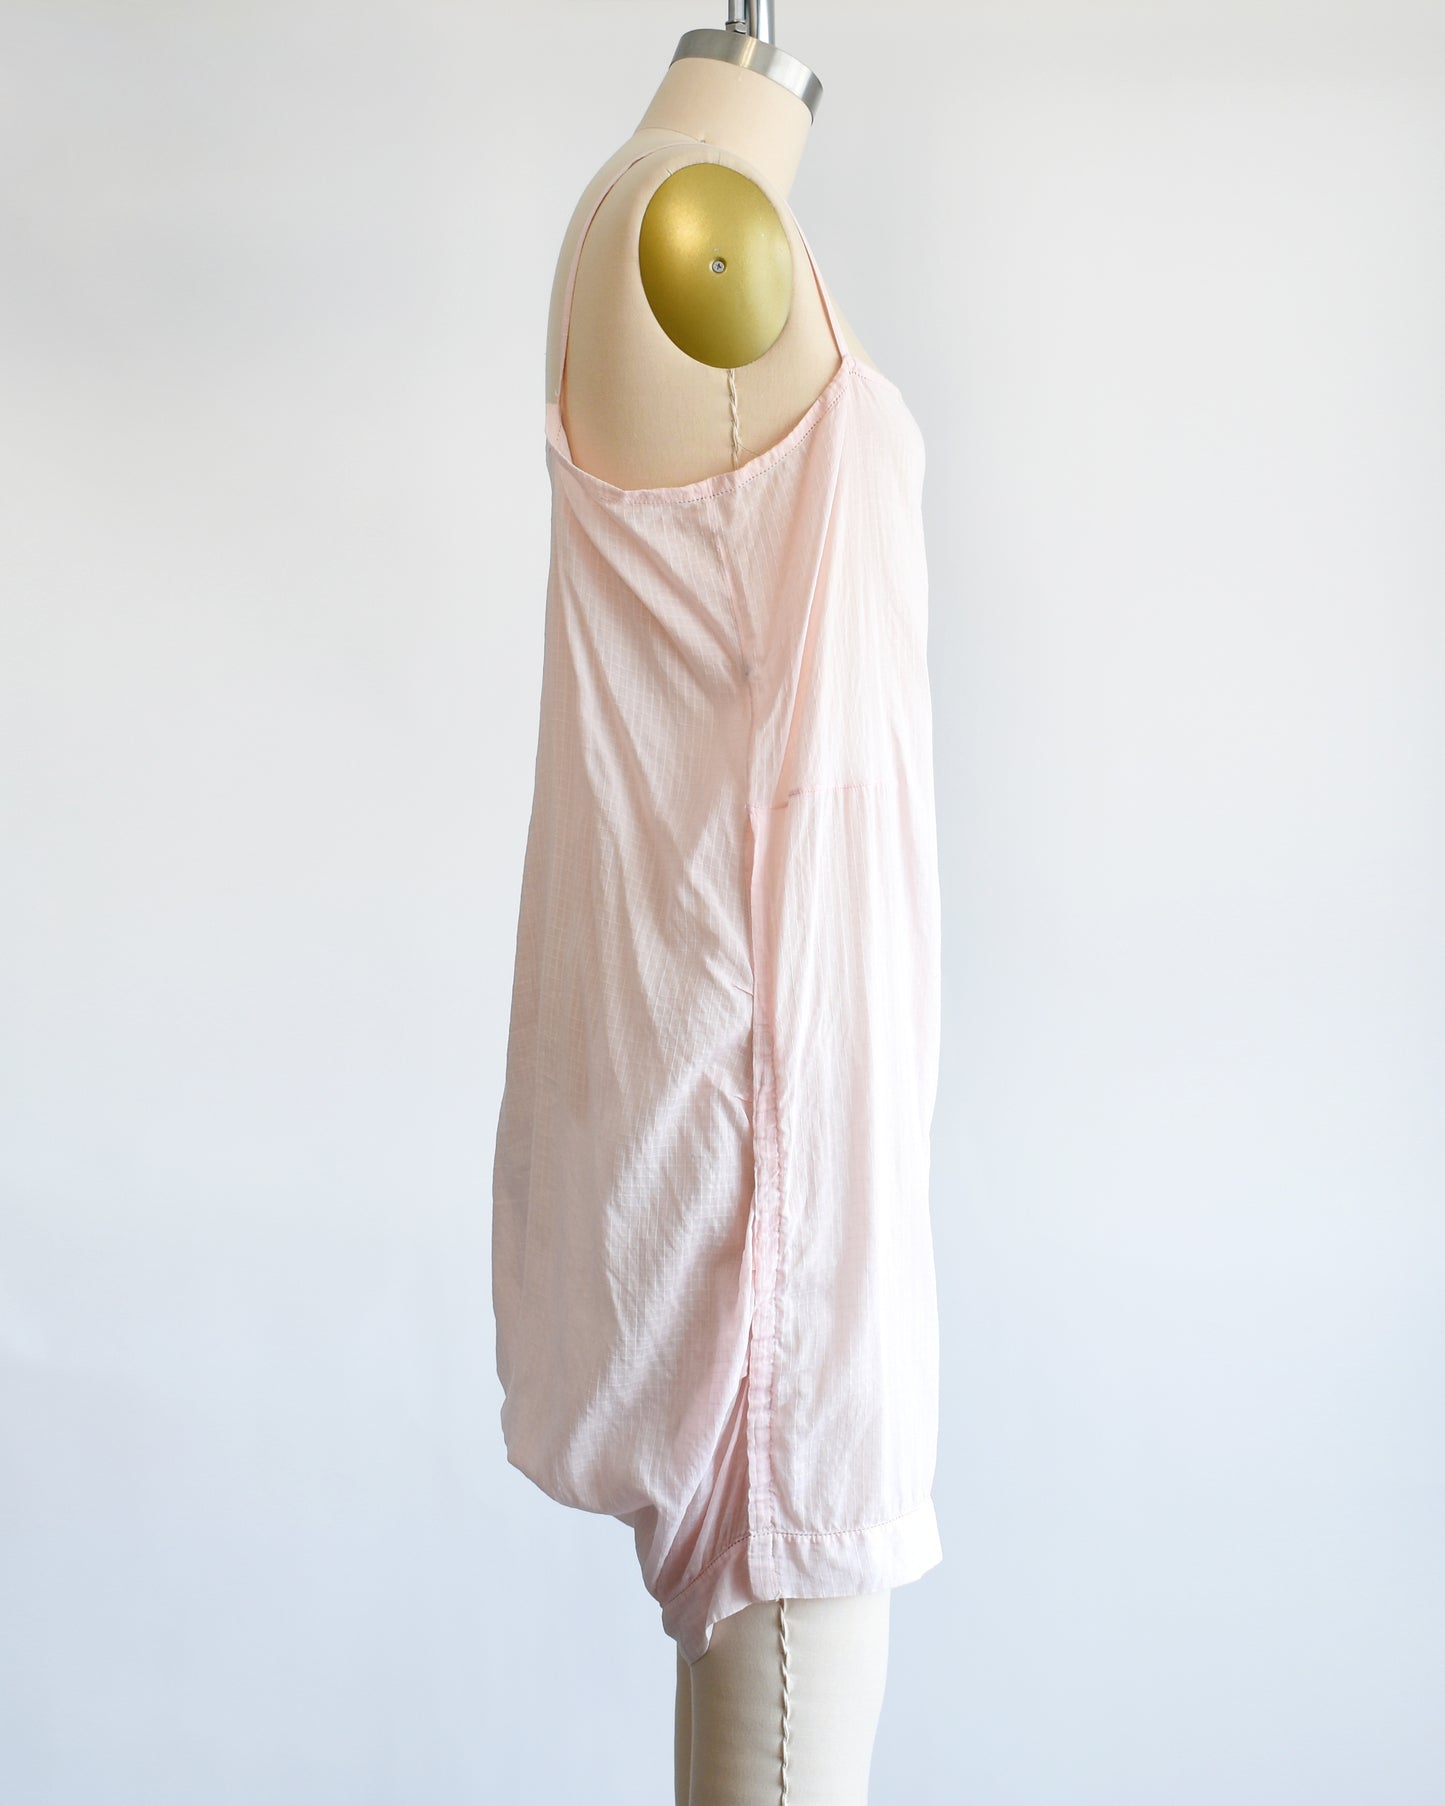 Side view of a vintage 1920s light pink chemise step in, which has spaghetti straps, square neckline, and snap buttons on the right side. The garment is on a dress form.